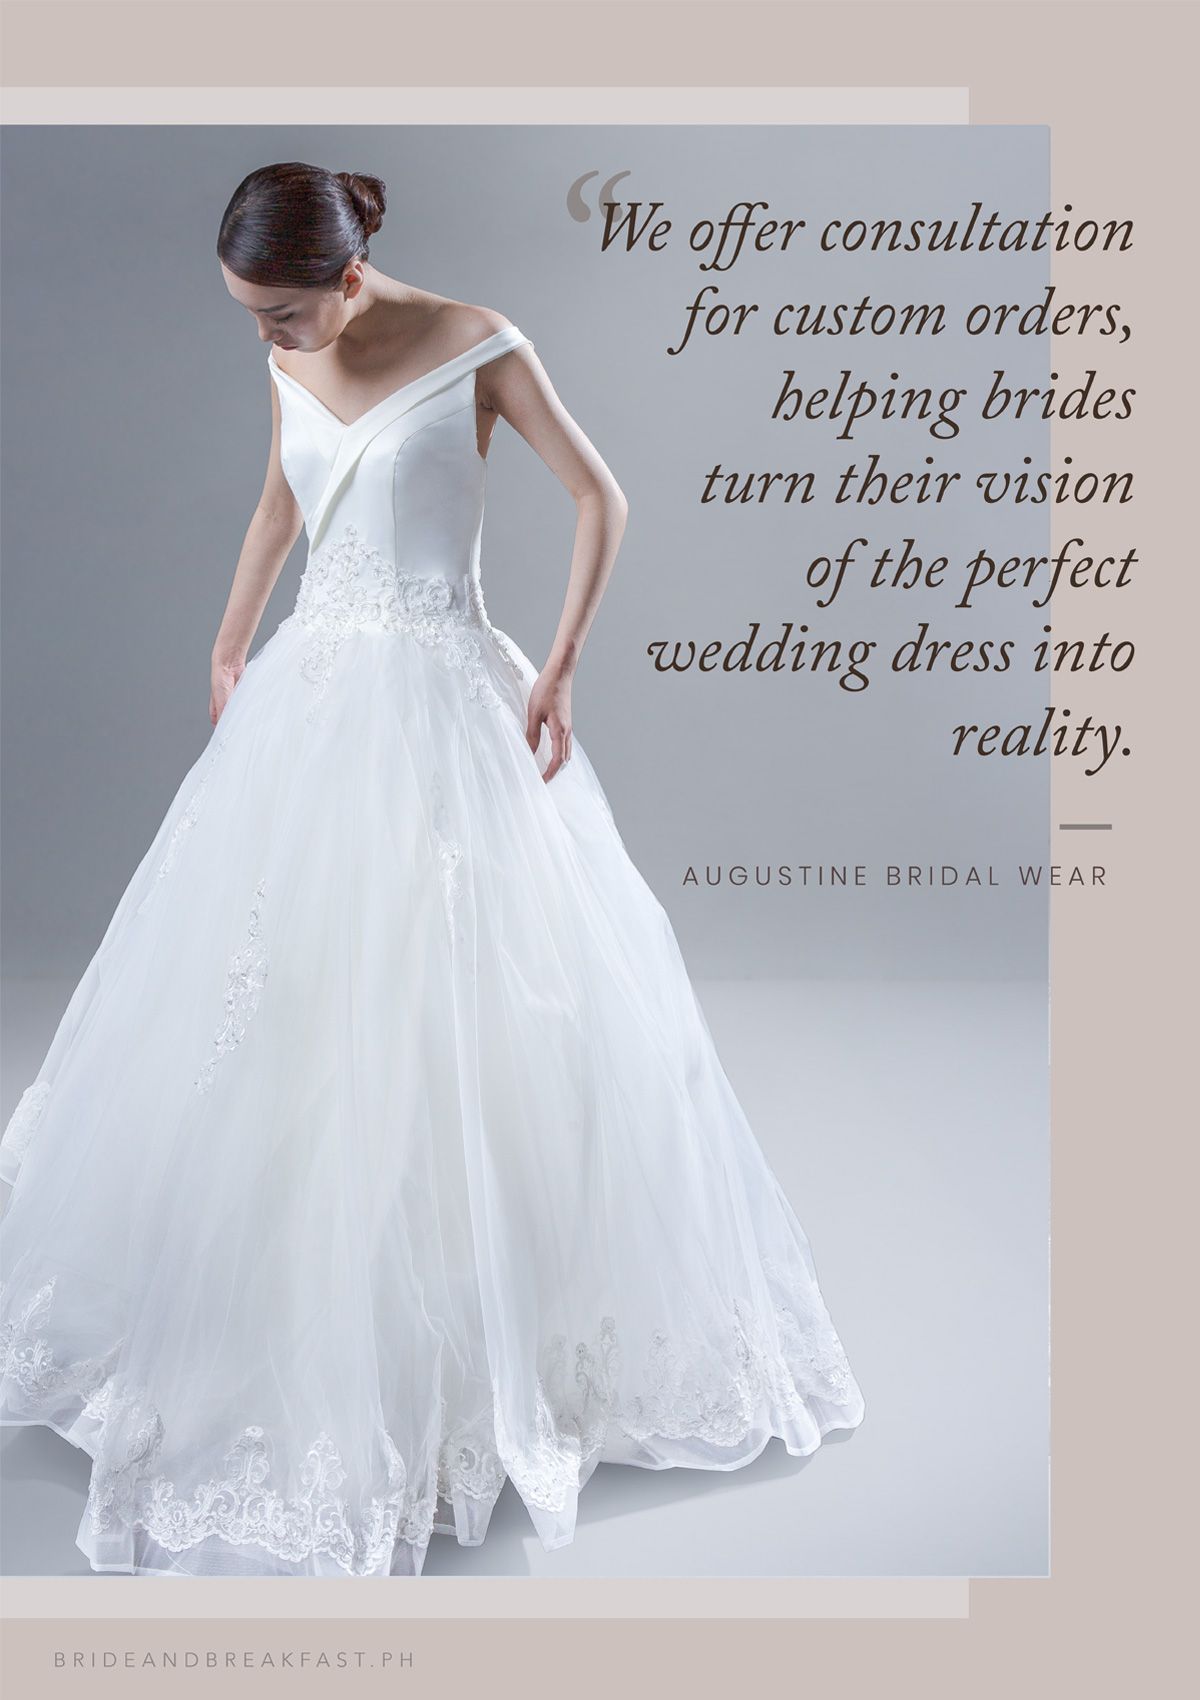 You Can Rent, Customize, or Buy Your Wedding Gown from ...